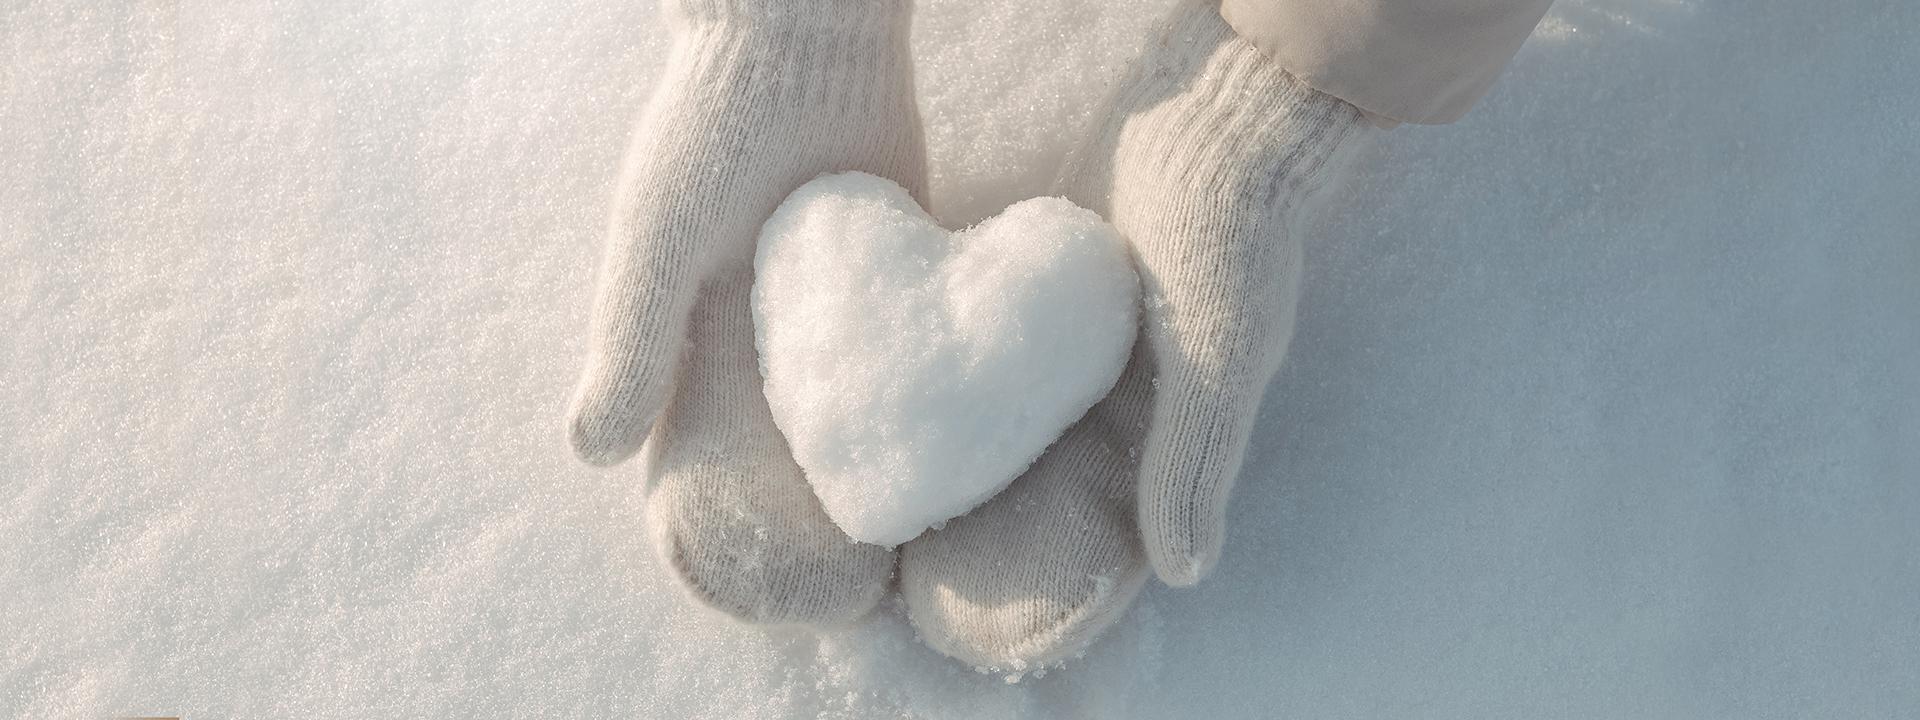 A child wearing white mittens delicately holding a heart-shaped snowball against a snowy background